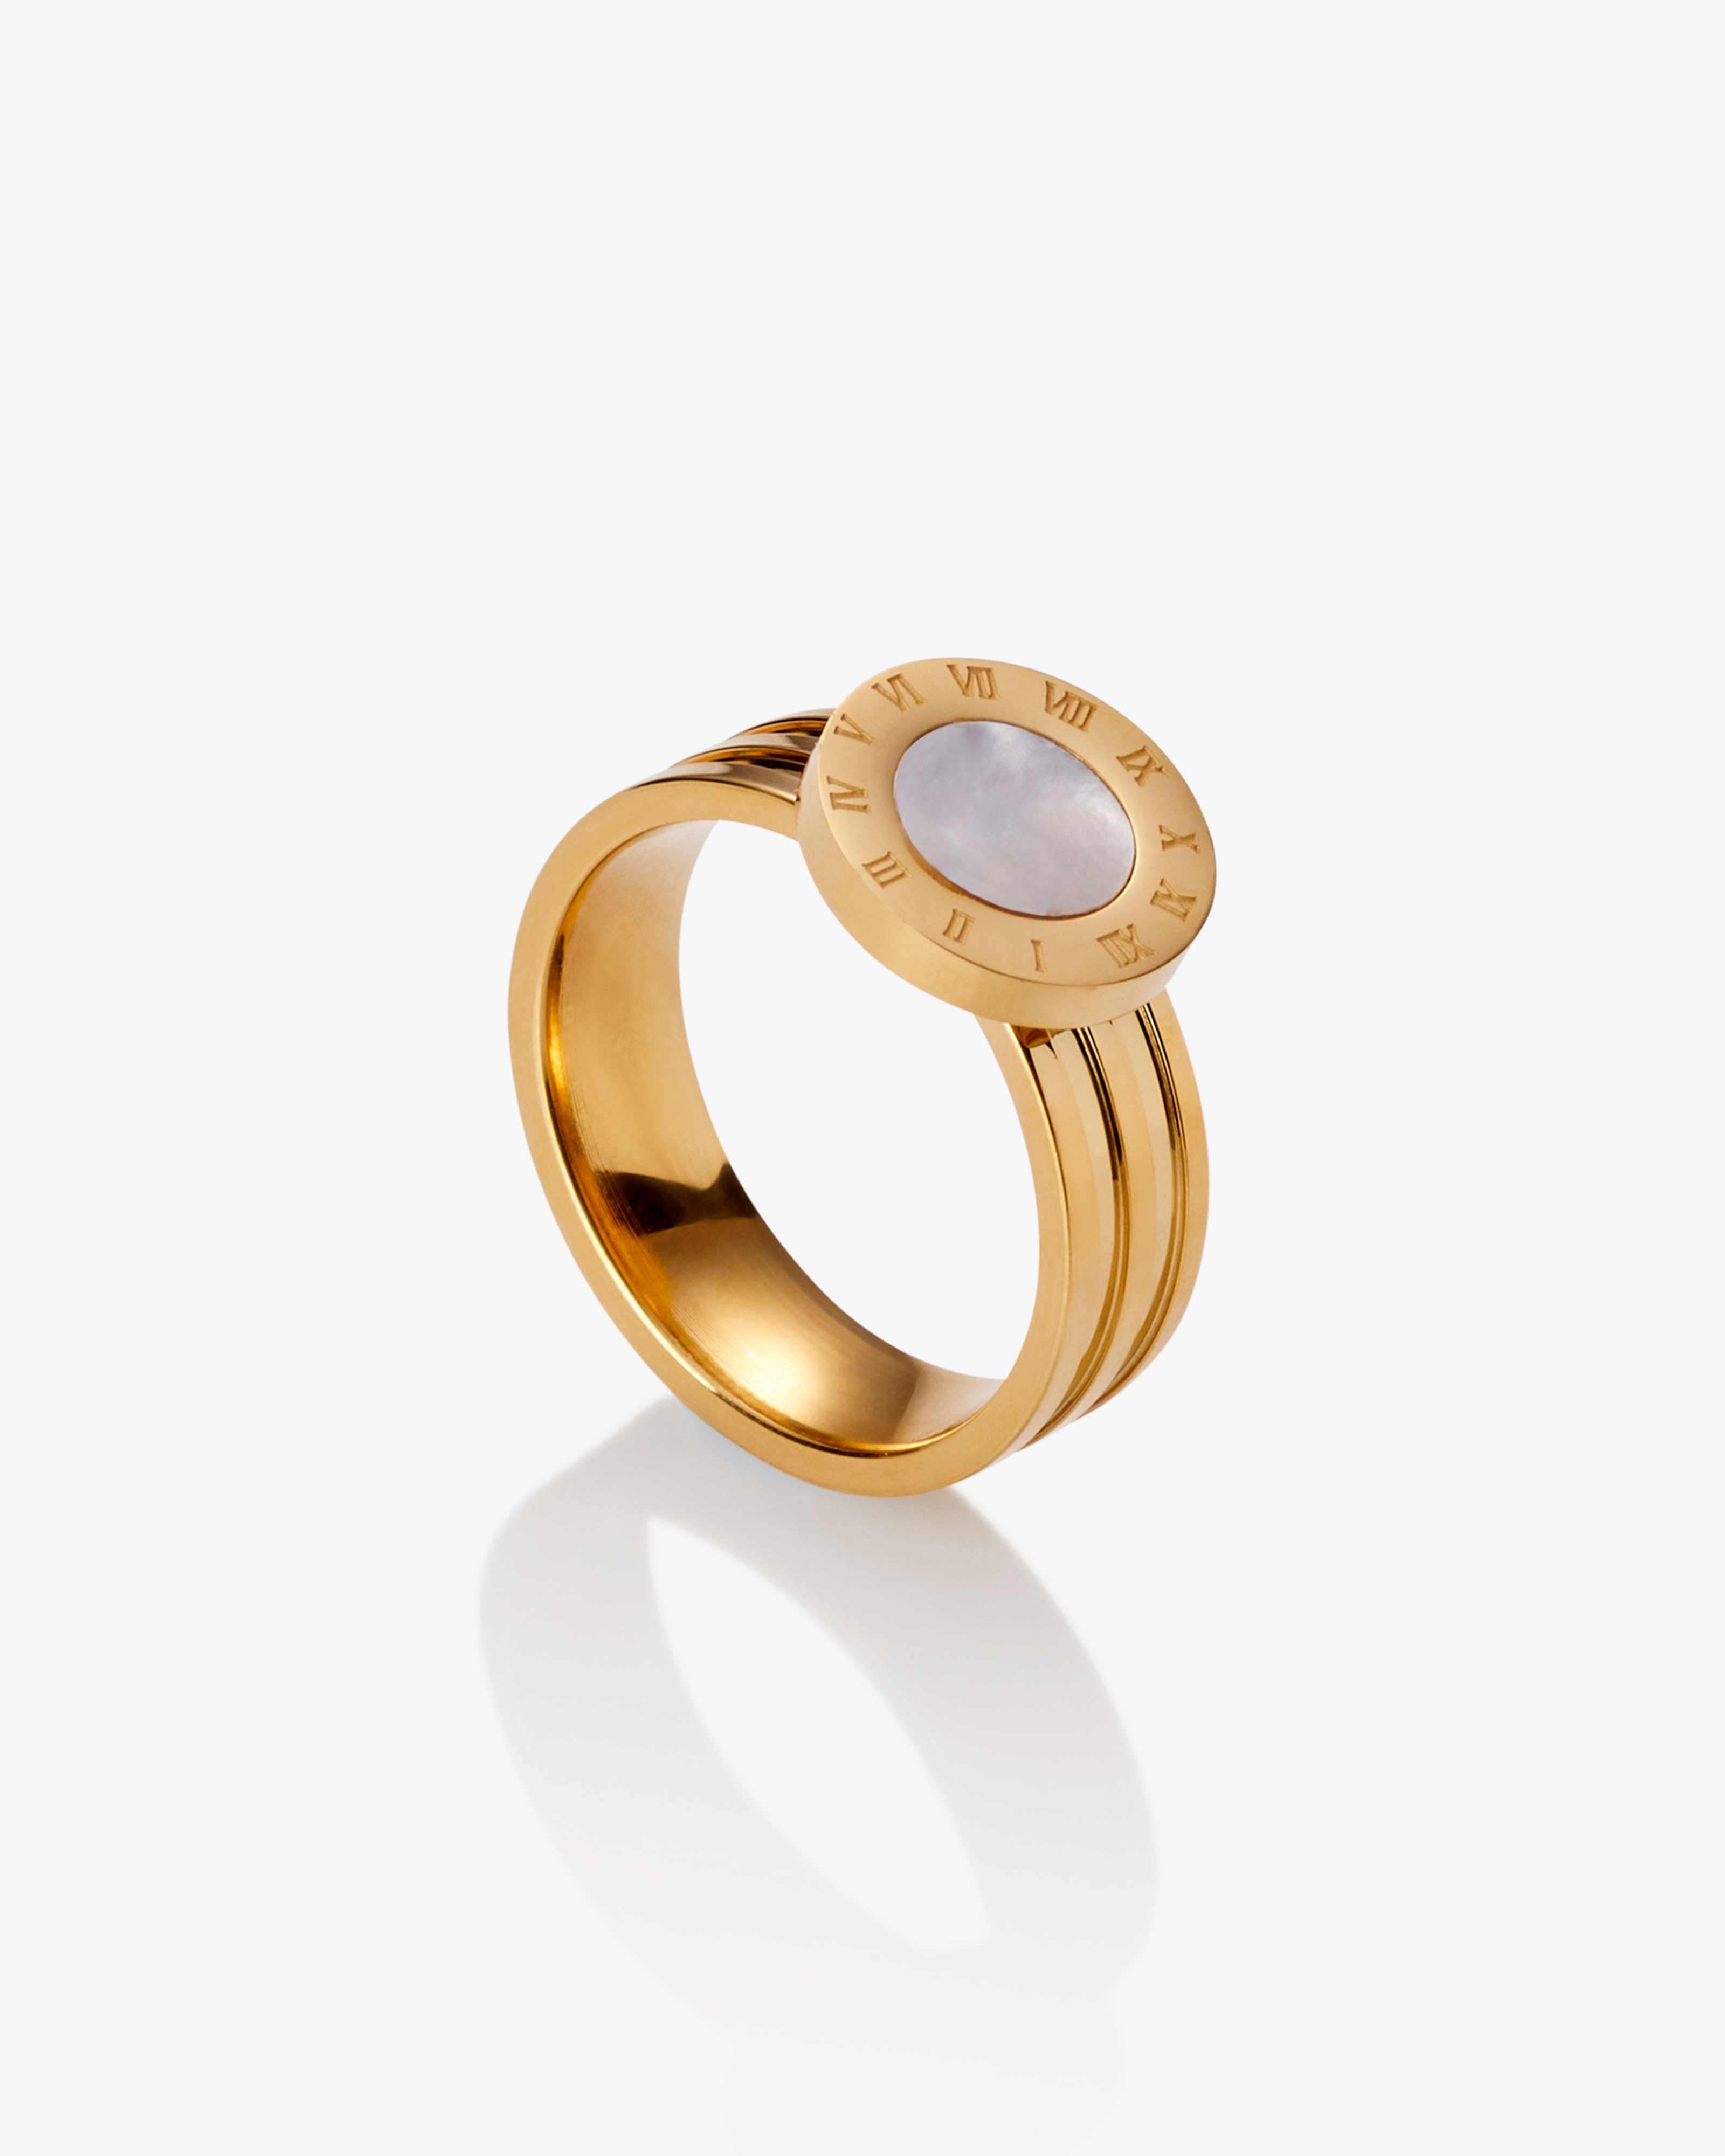 Gold & White Roman Numeral Dial Ring